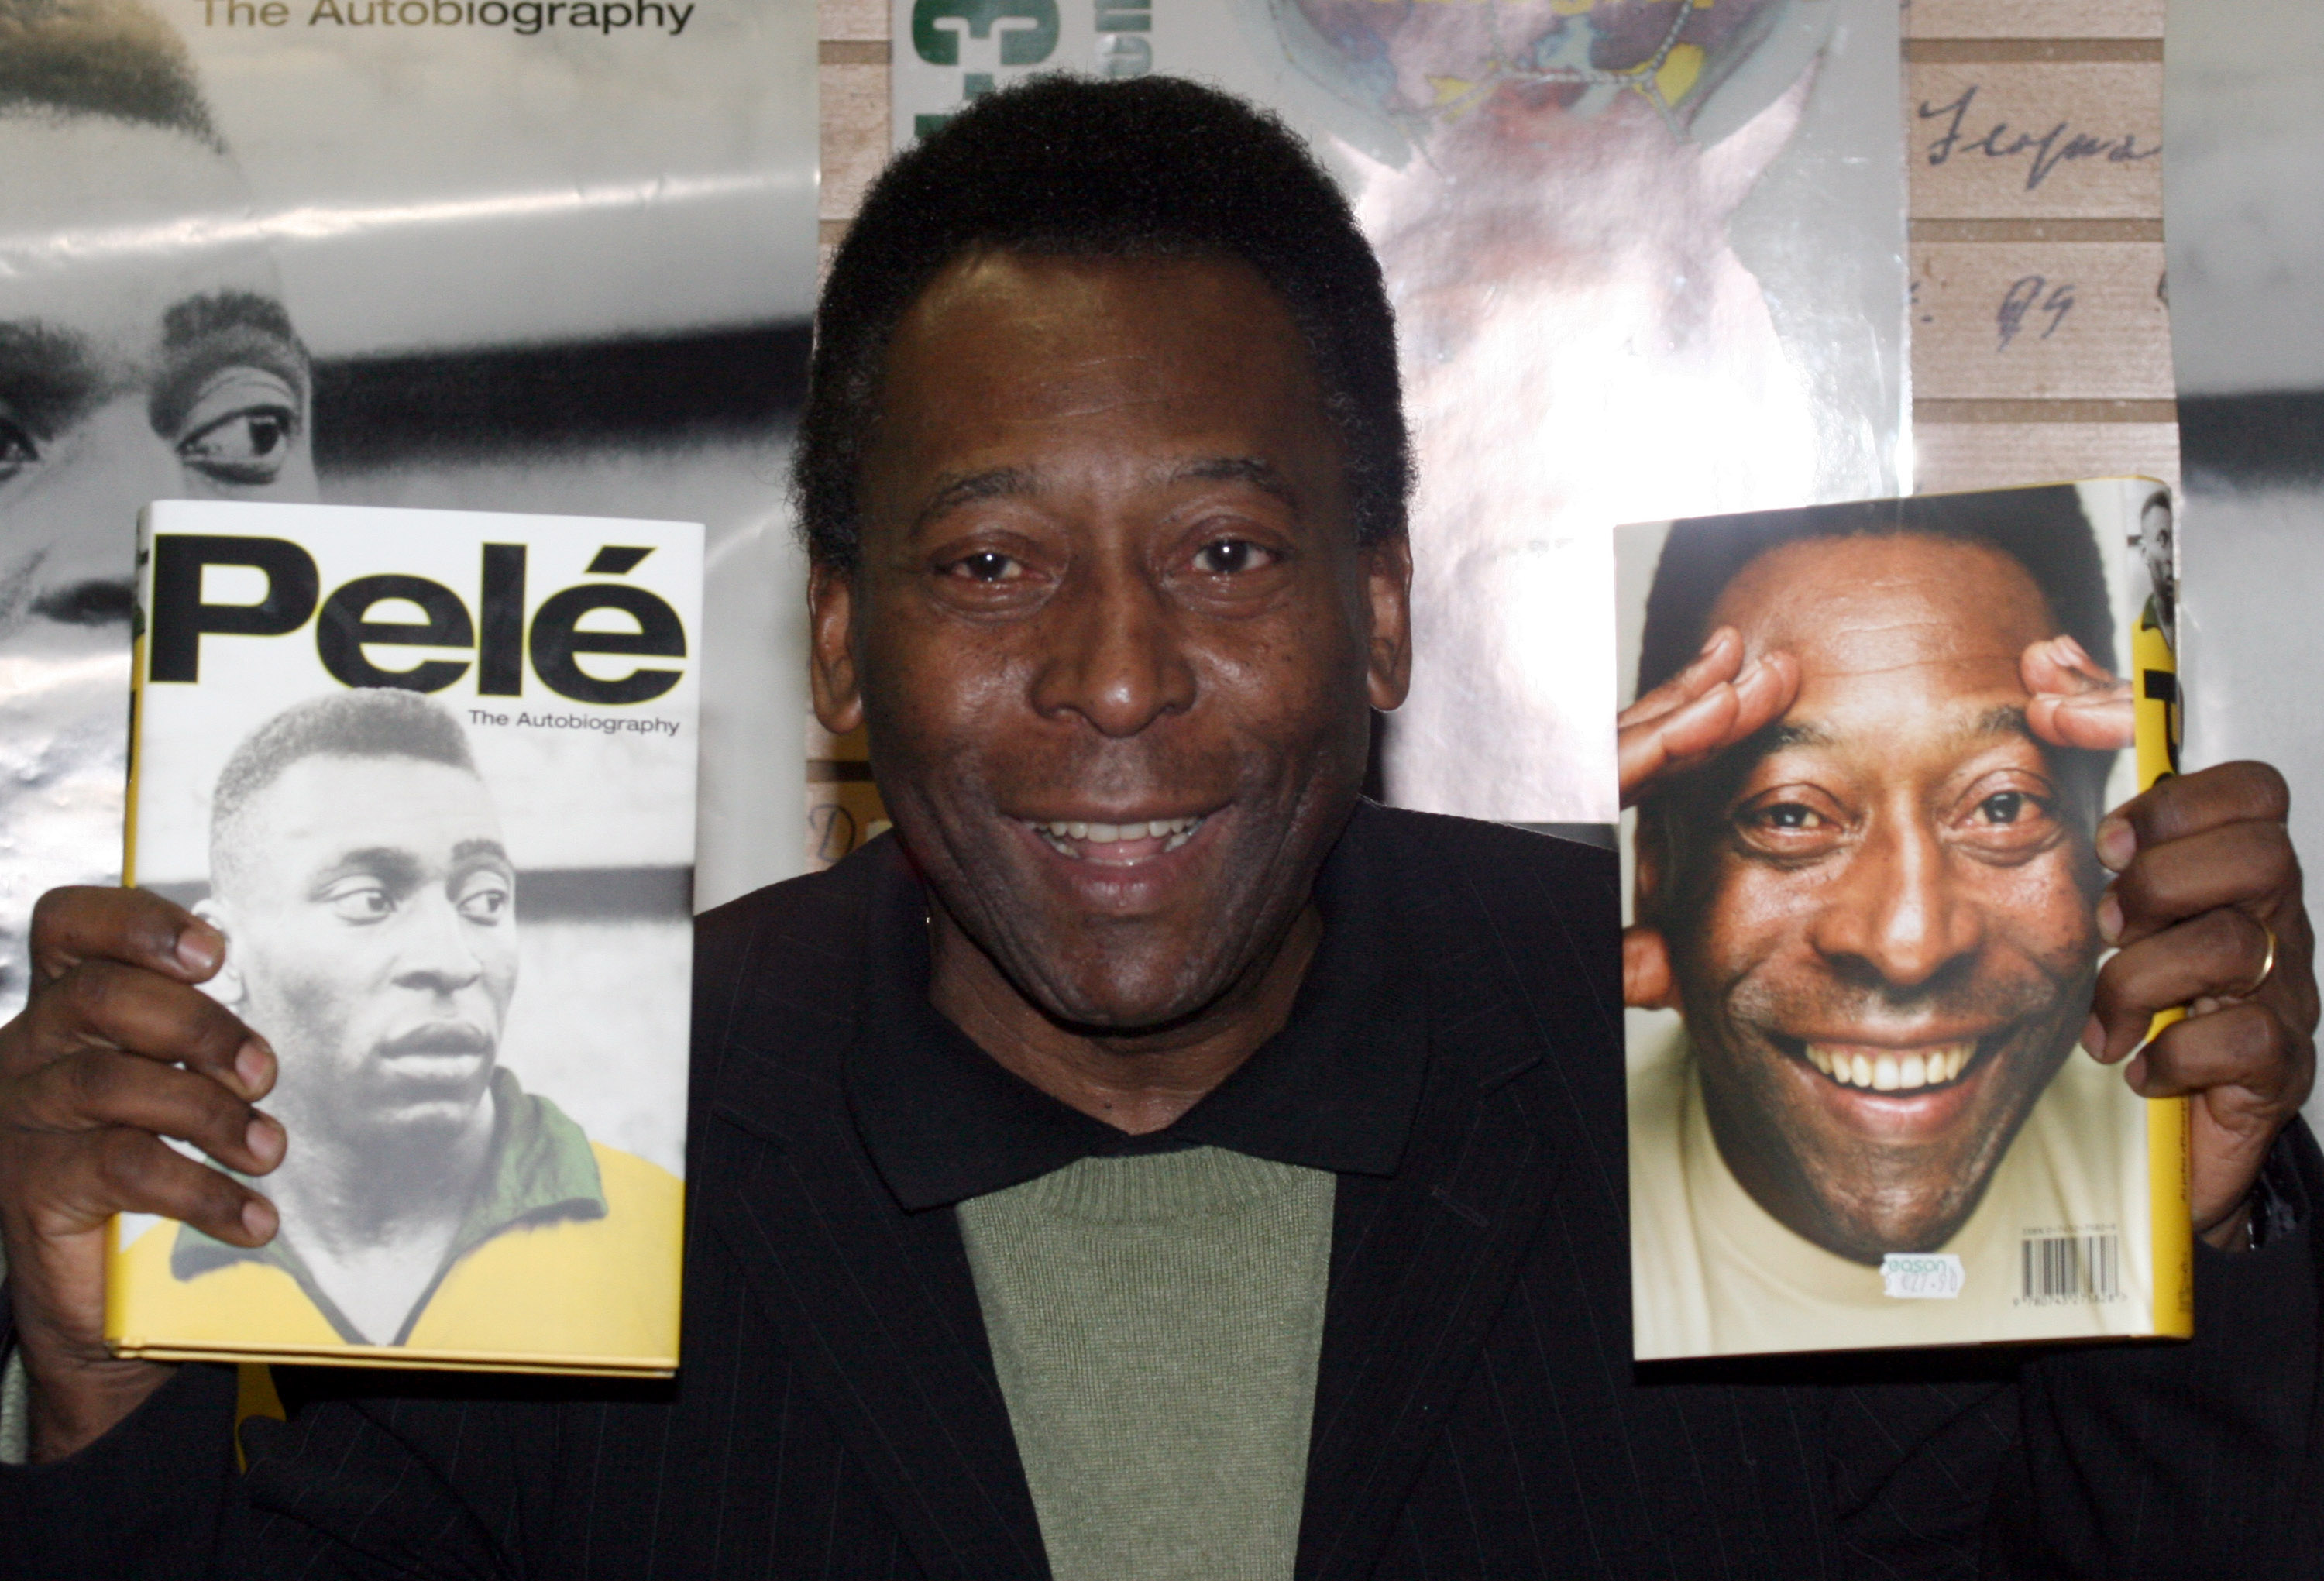 Soccer star Pelé during a book signing in 2006